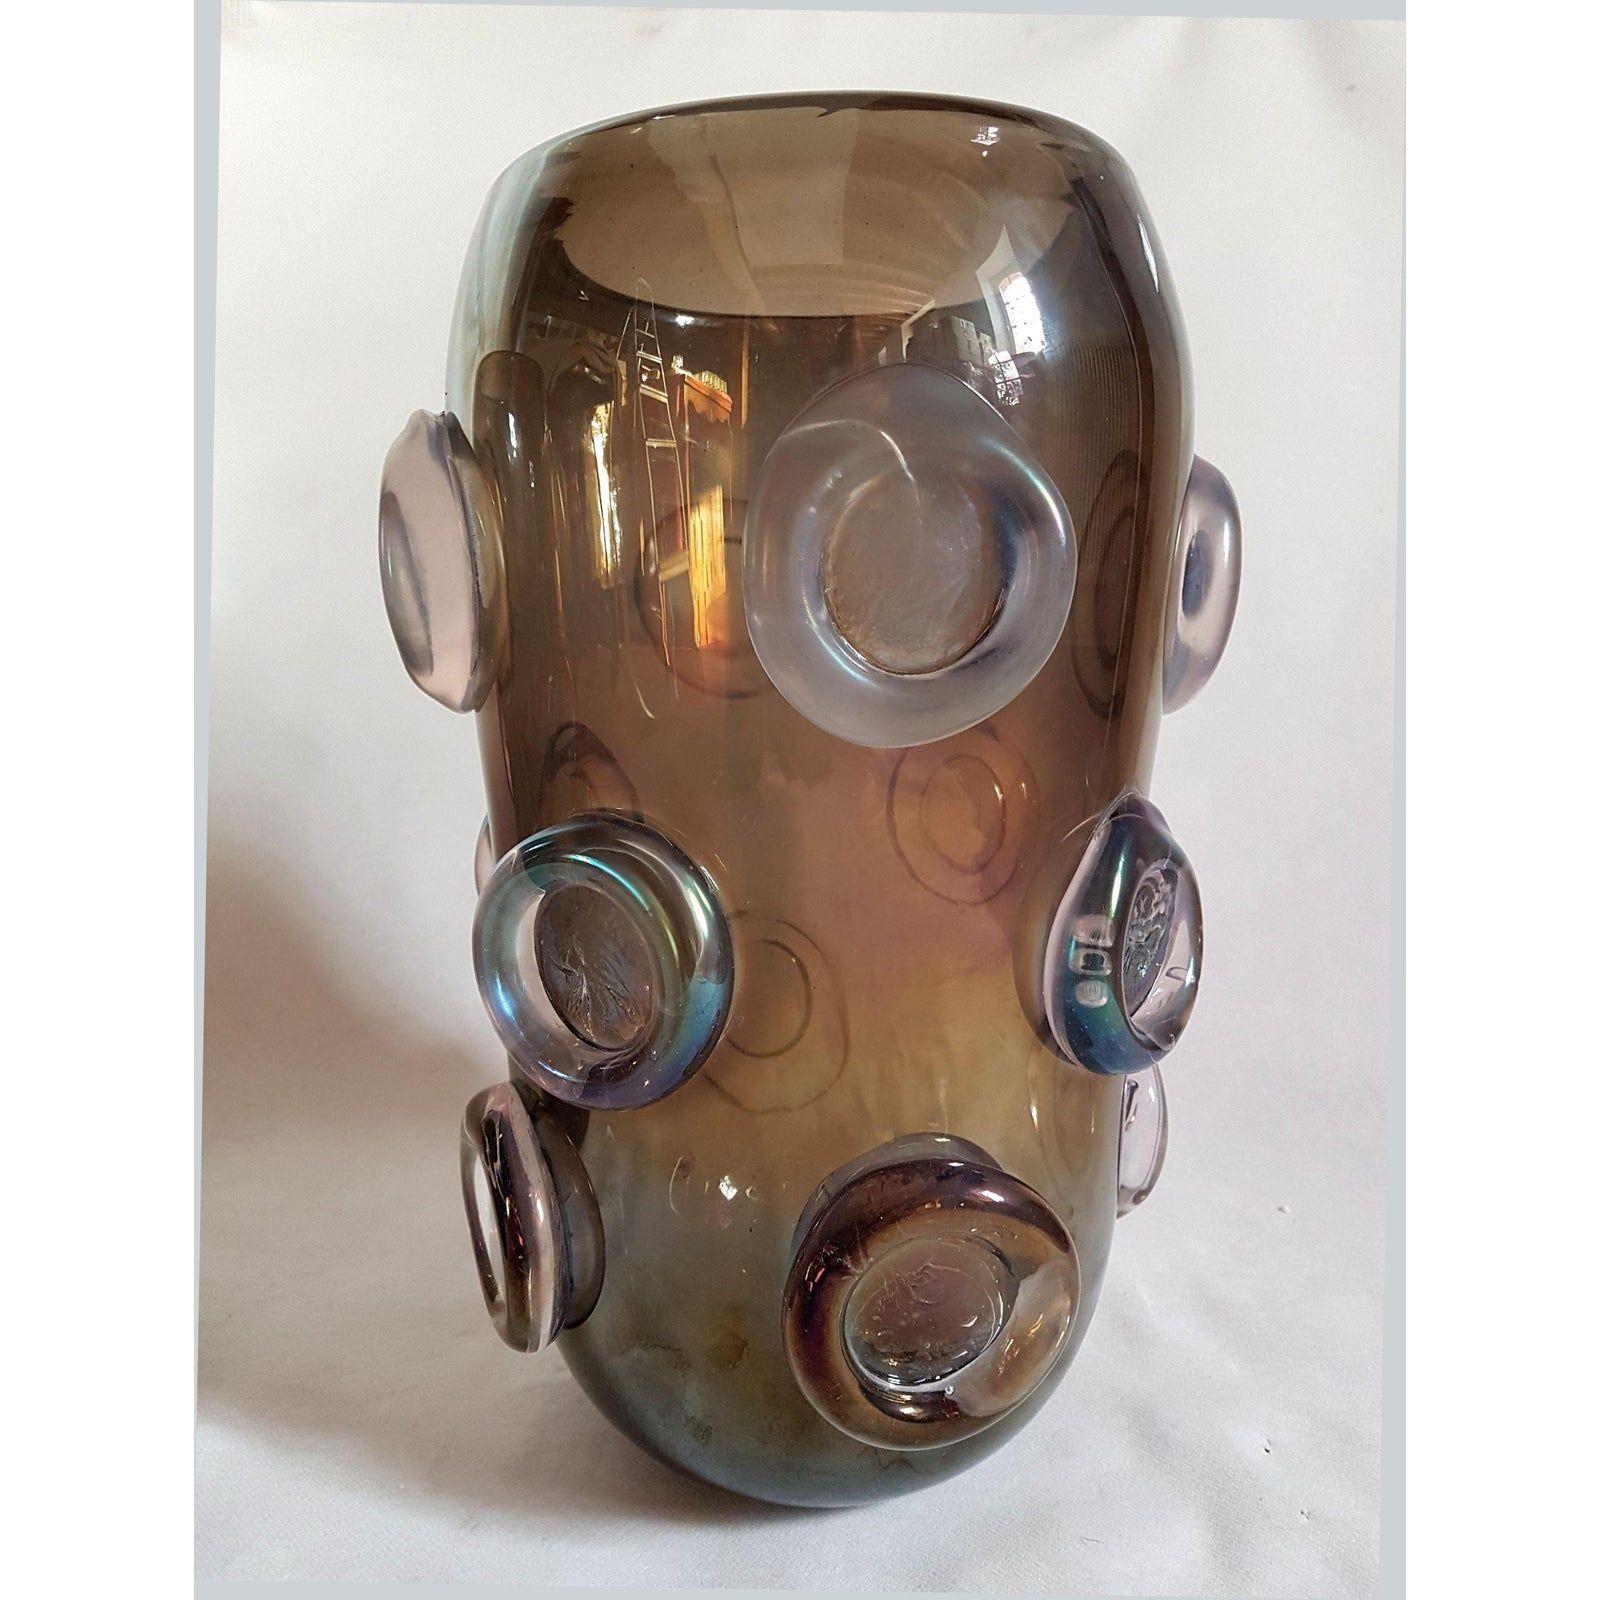 Large Mid-Century Modern Murano glass vase, or urn, by Seguso, Italy, 1970s.
Hand made Murano glass, with a beautiful thickness and decor.
The vase is in a translucent and iridescent light brown Murano glass, with purple accents.
In excellent